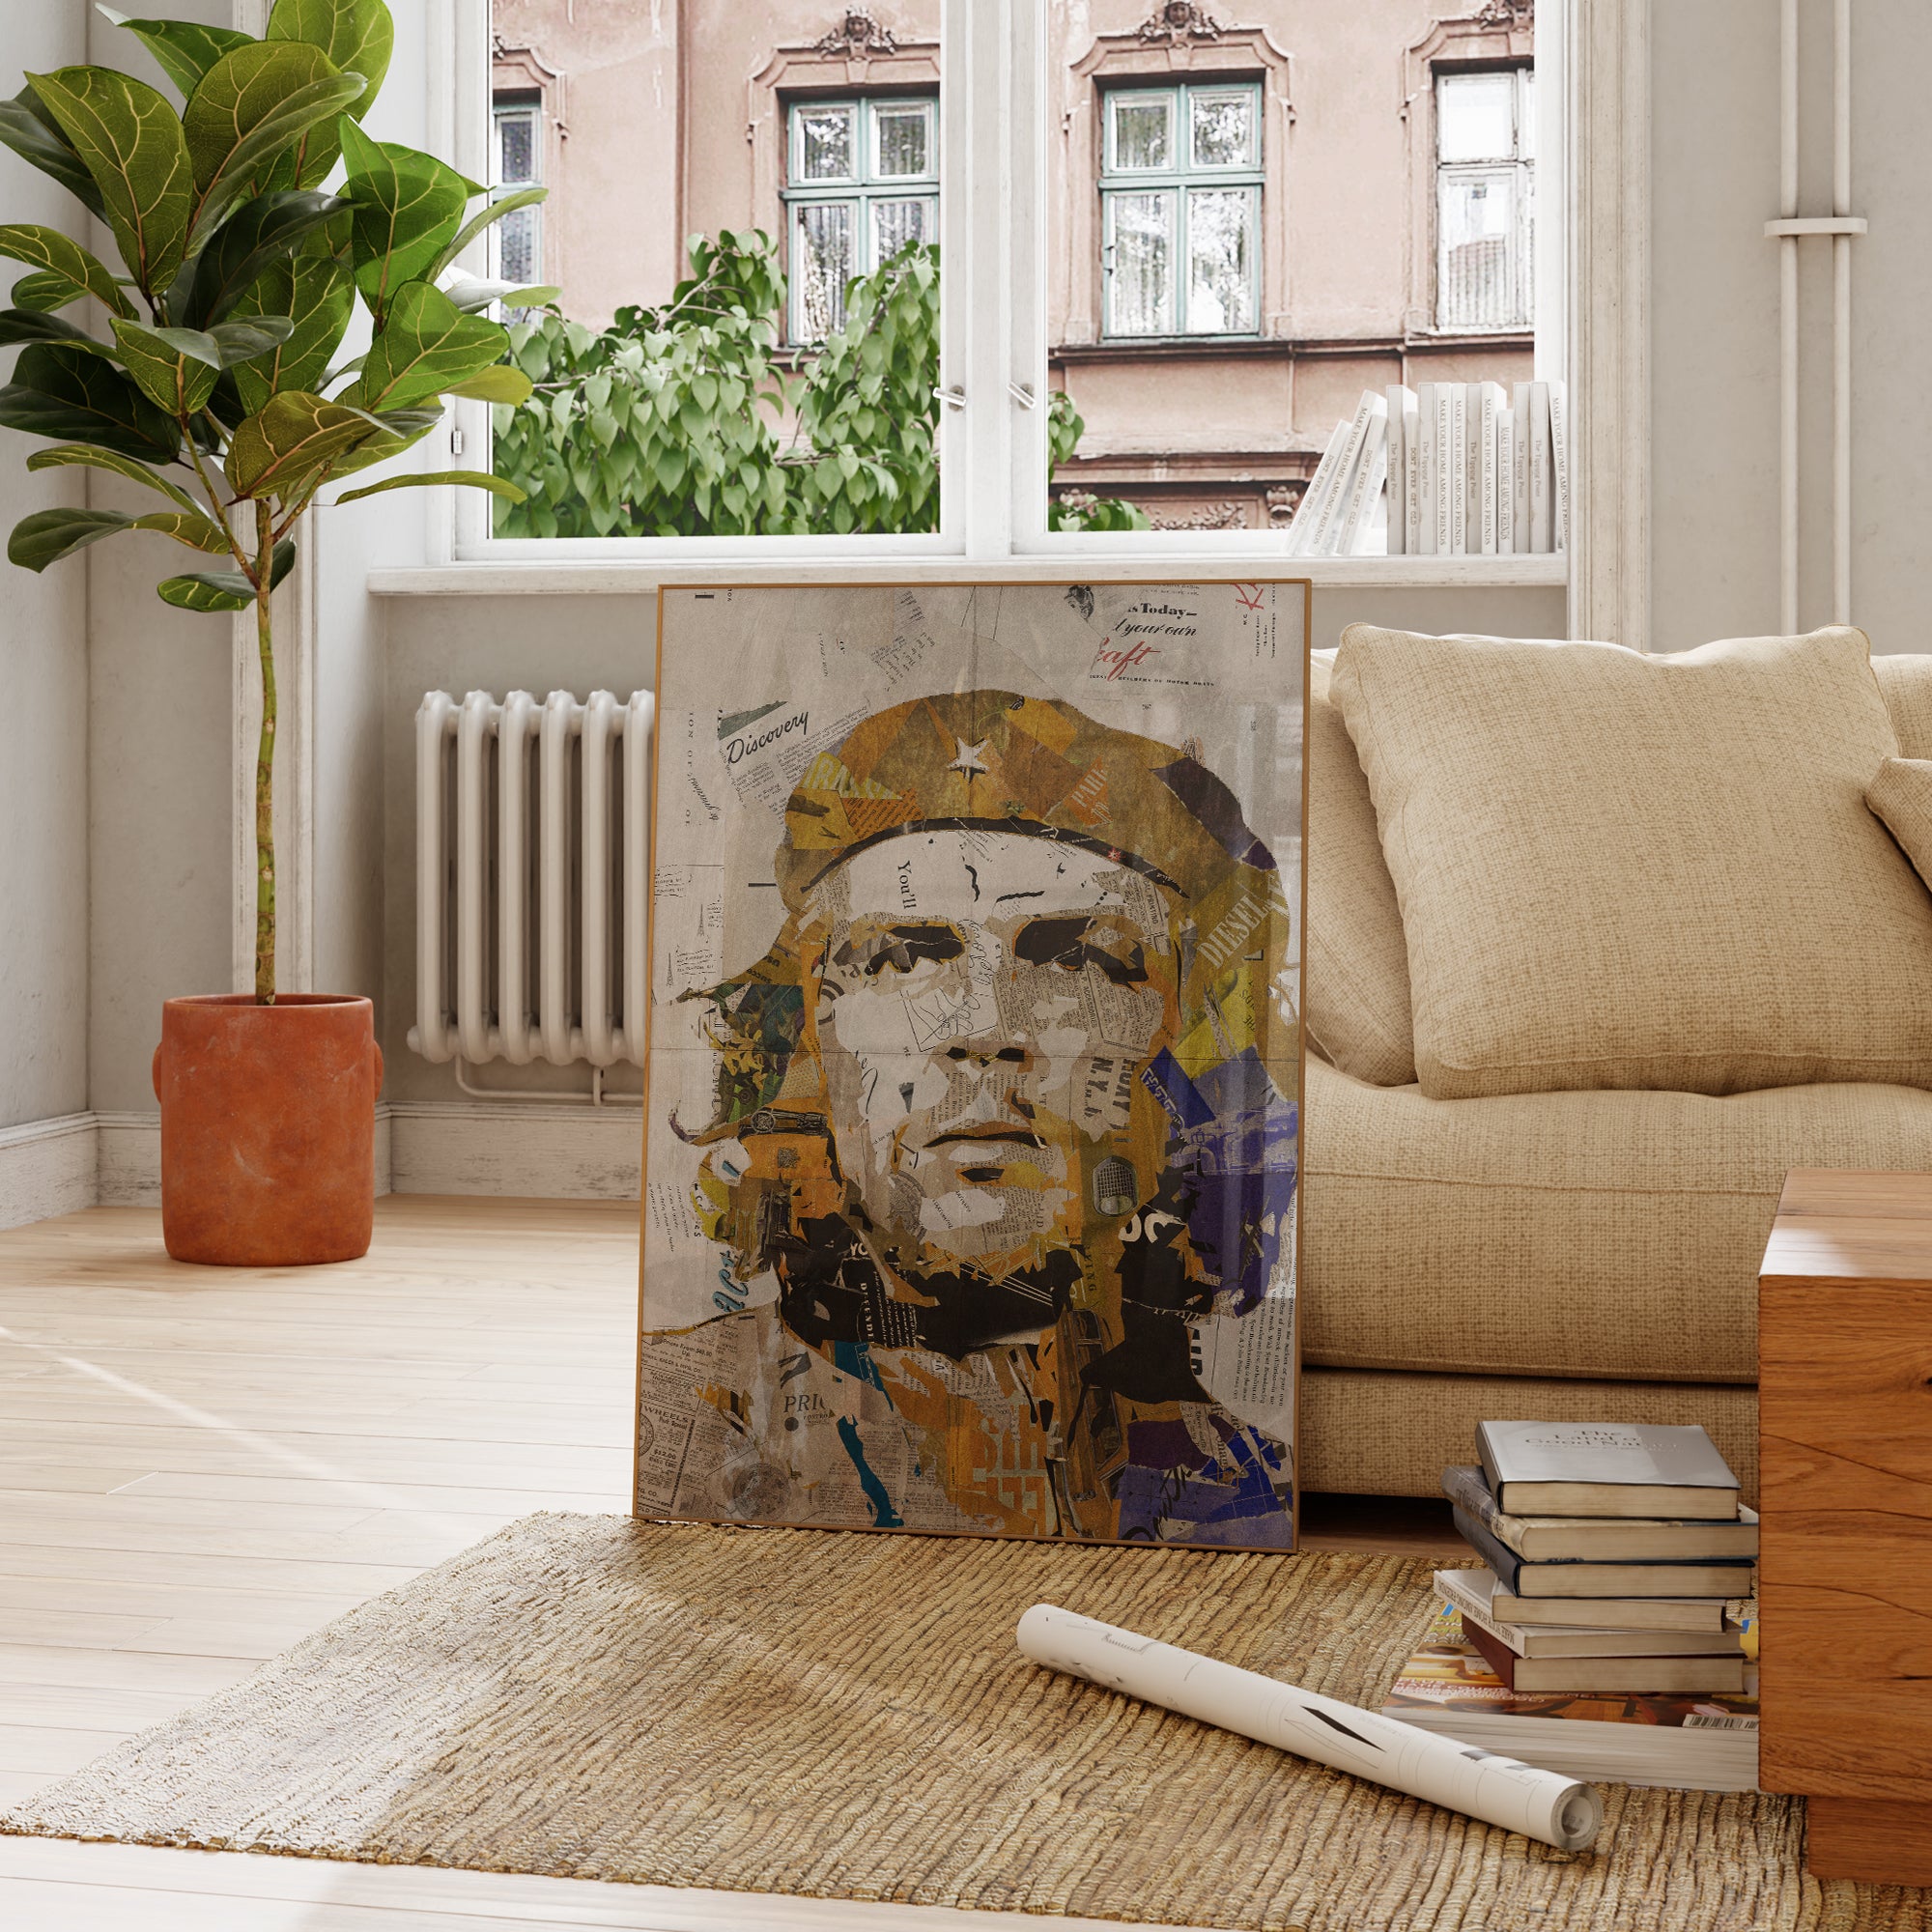 Be inspired by our iconic collage portrait art print of Che Guevara. This artwork was printed using the giclée process on archival acid-free paper and is presented in a French living room, capturing its timeless beauty in every detail.